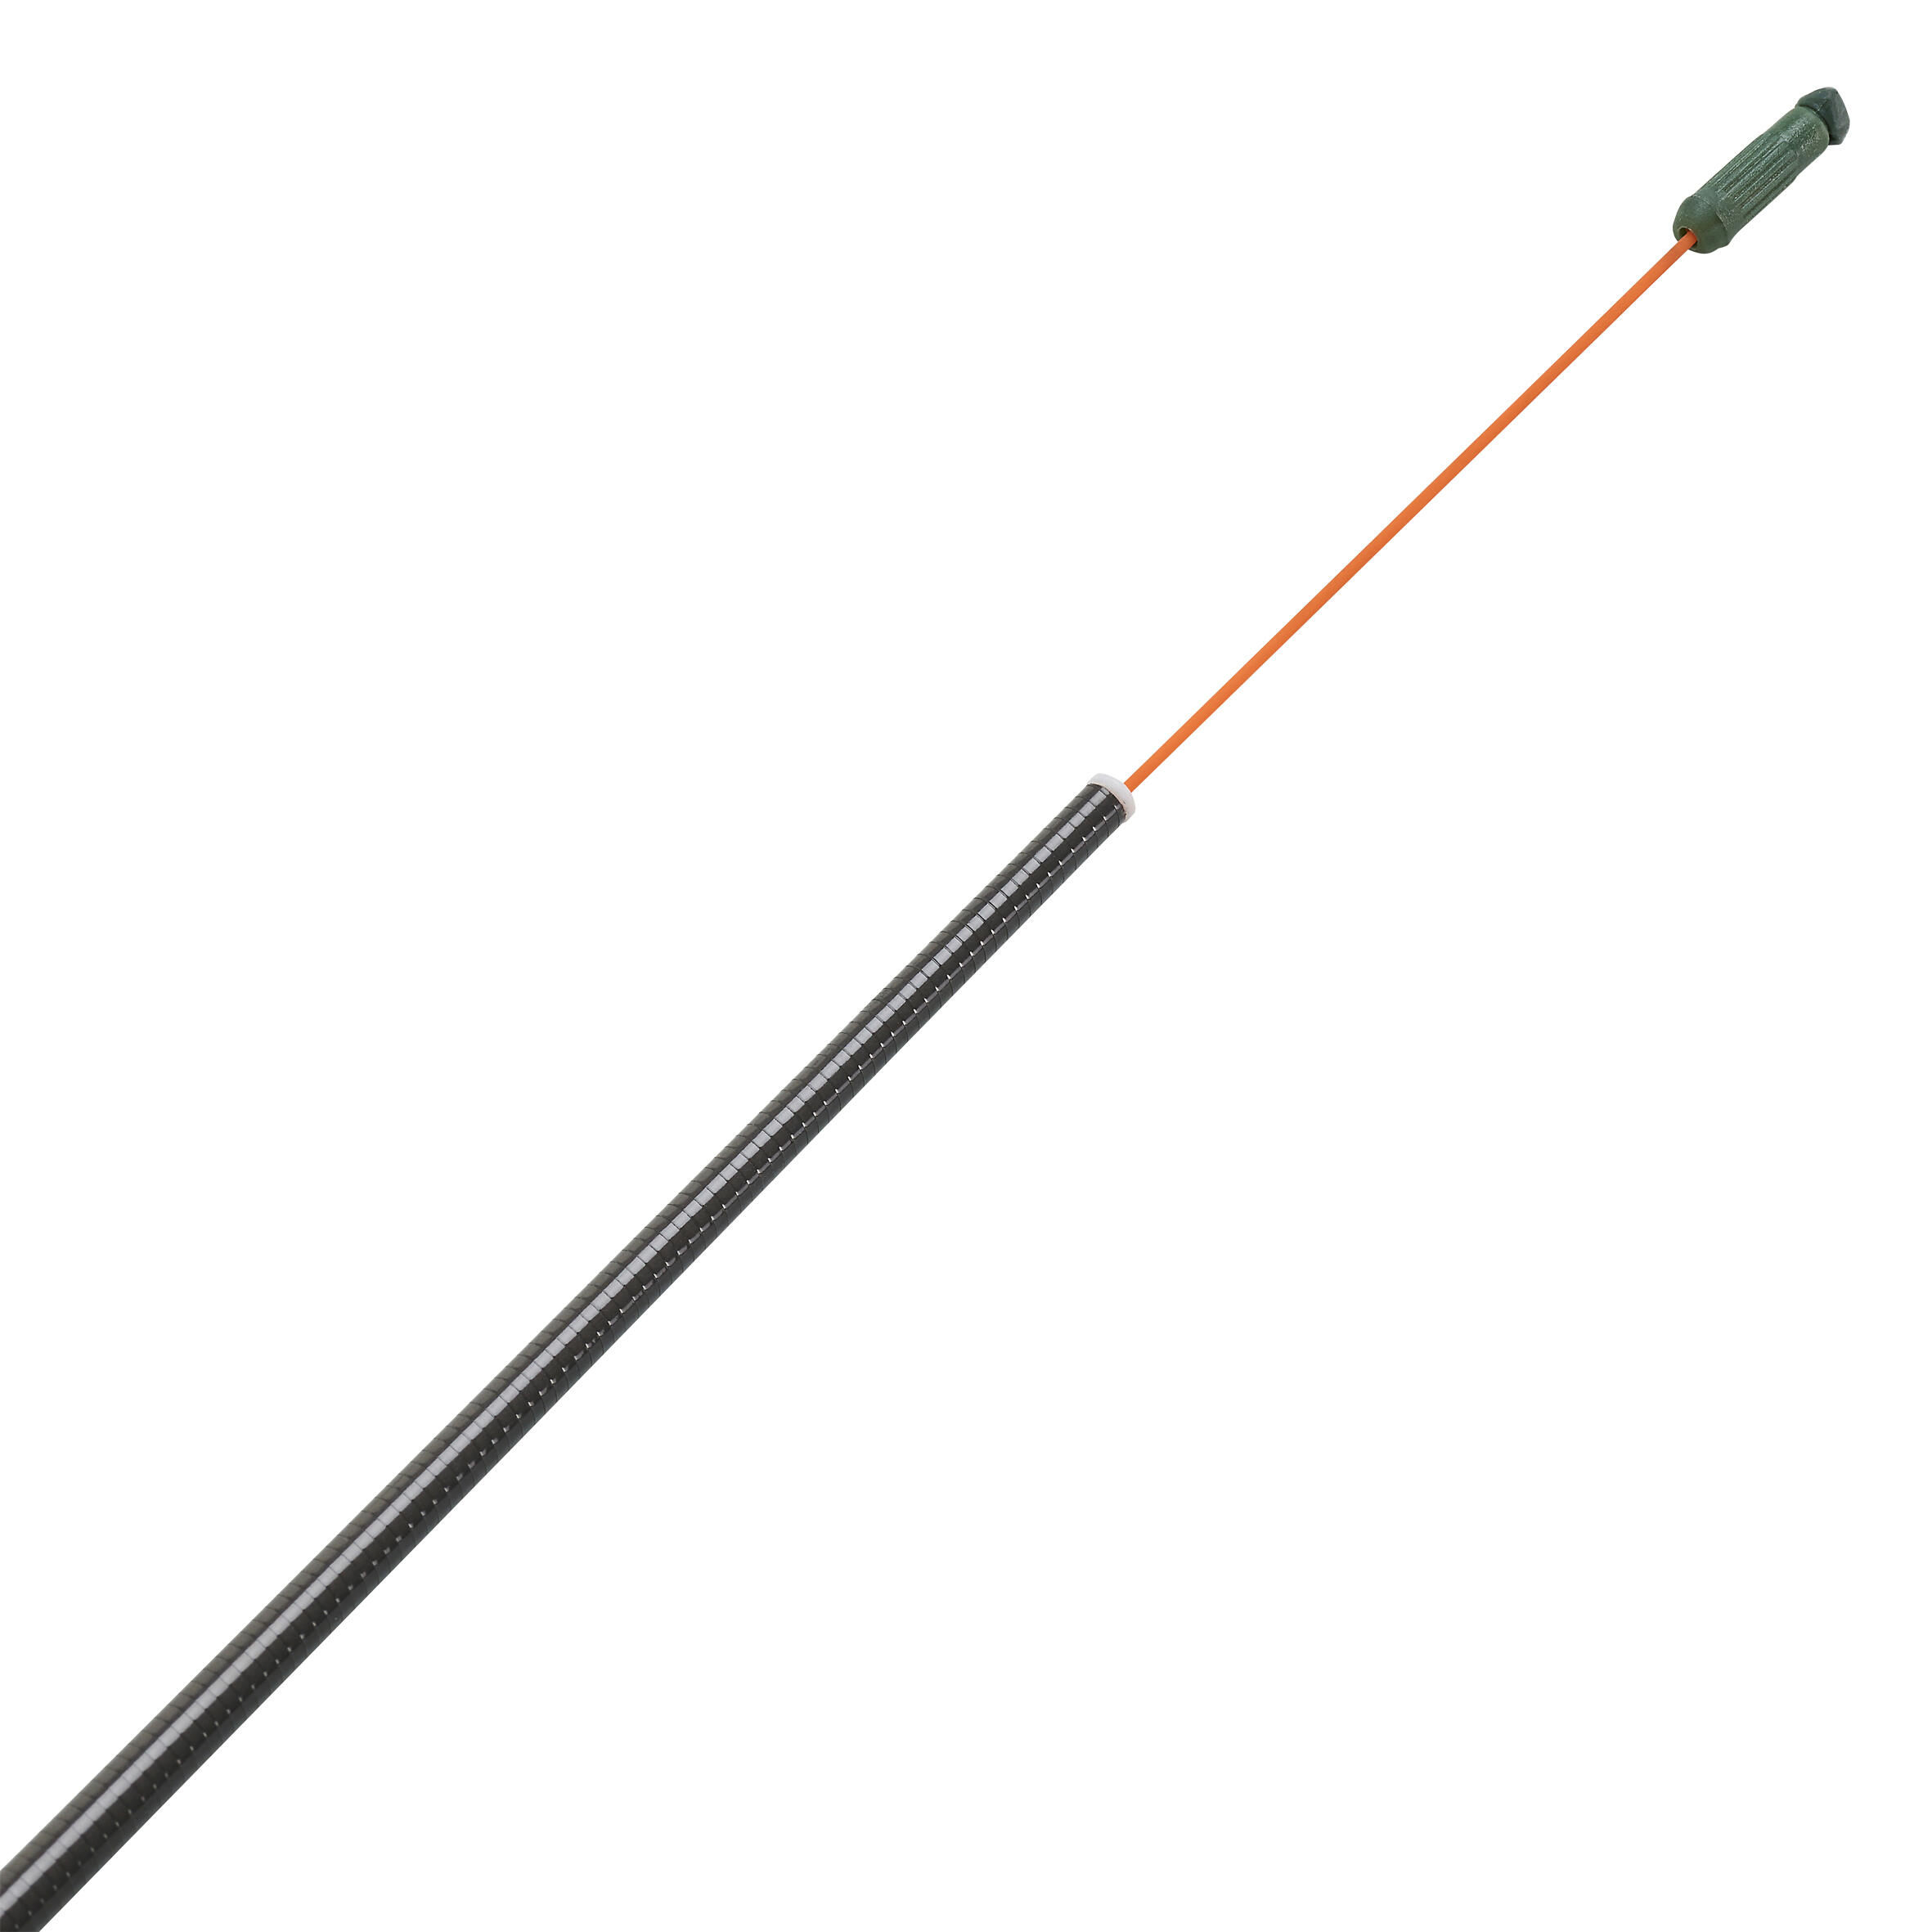 ROD NORTHLAKE 100 5M FOR FISHING WHITEFISH WITH PRESS-FIT RODS 5/7